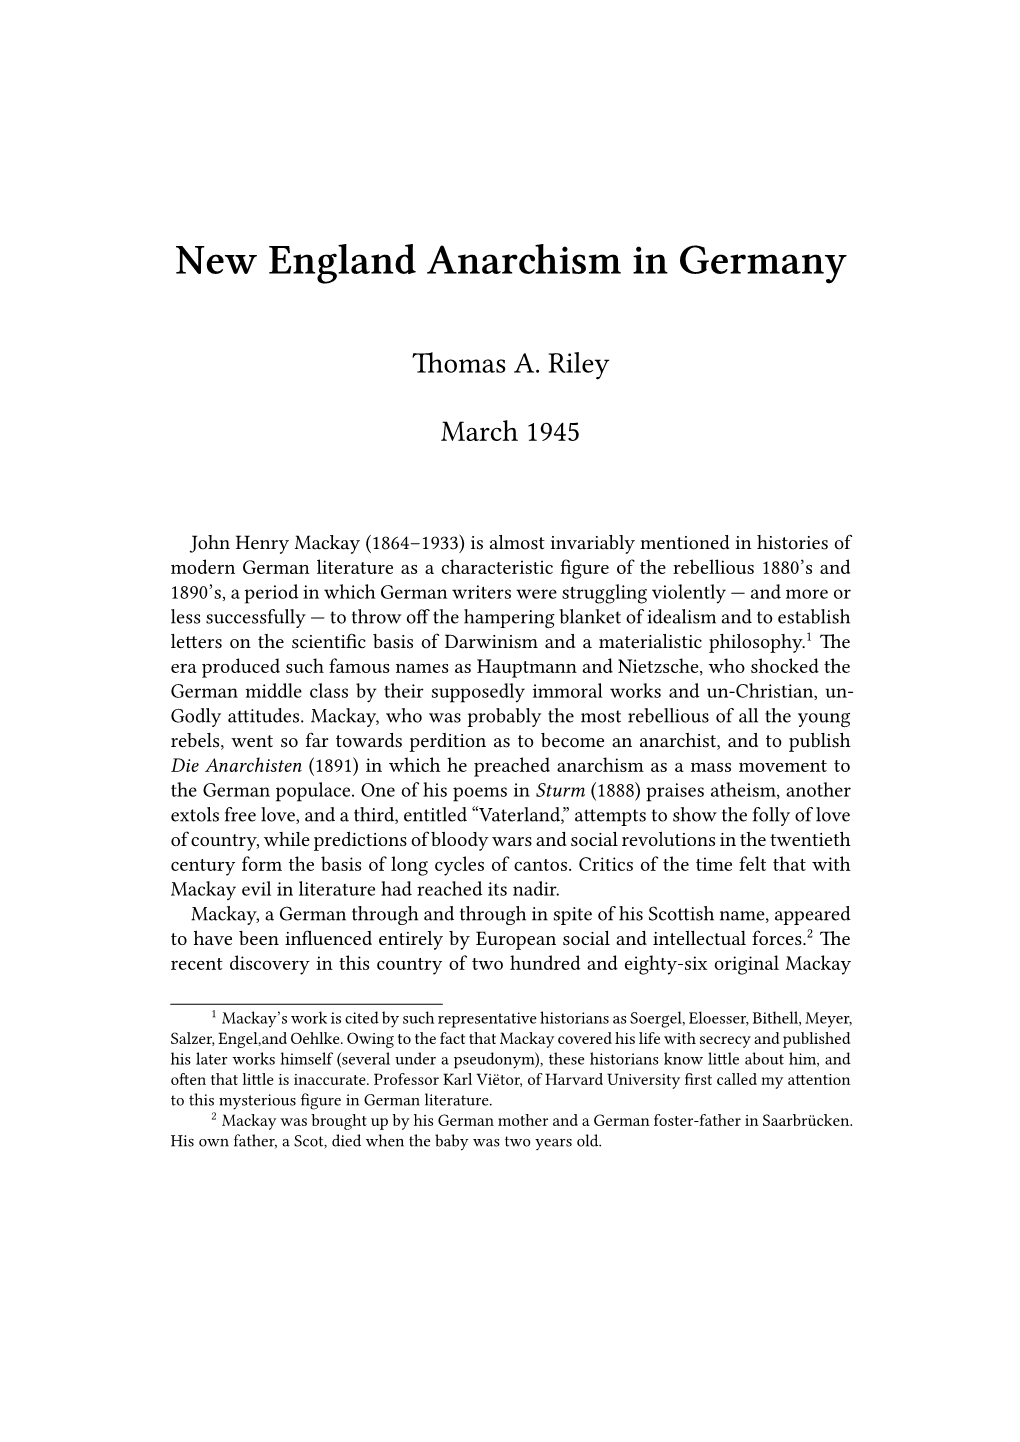 New England Anarchism in Germany